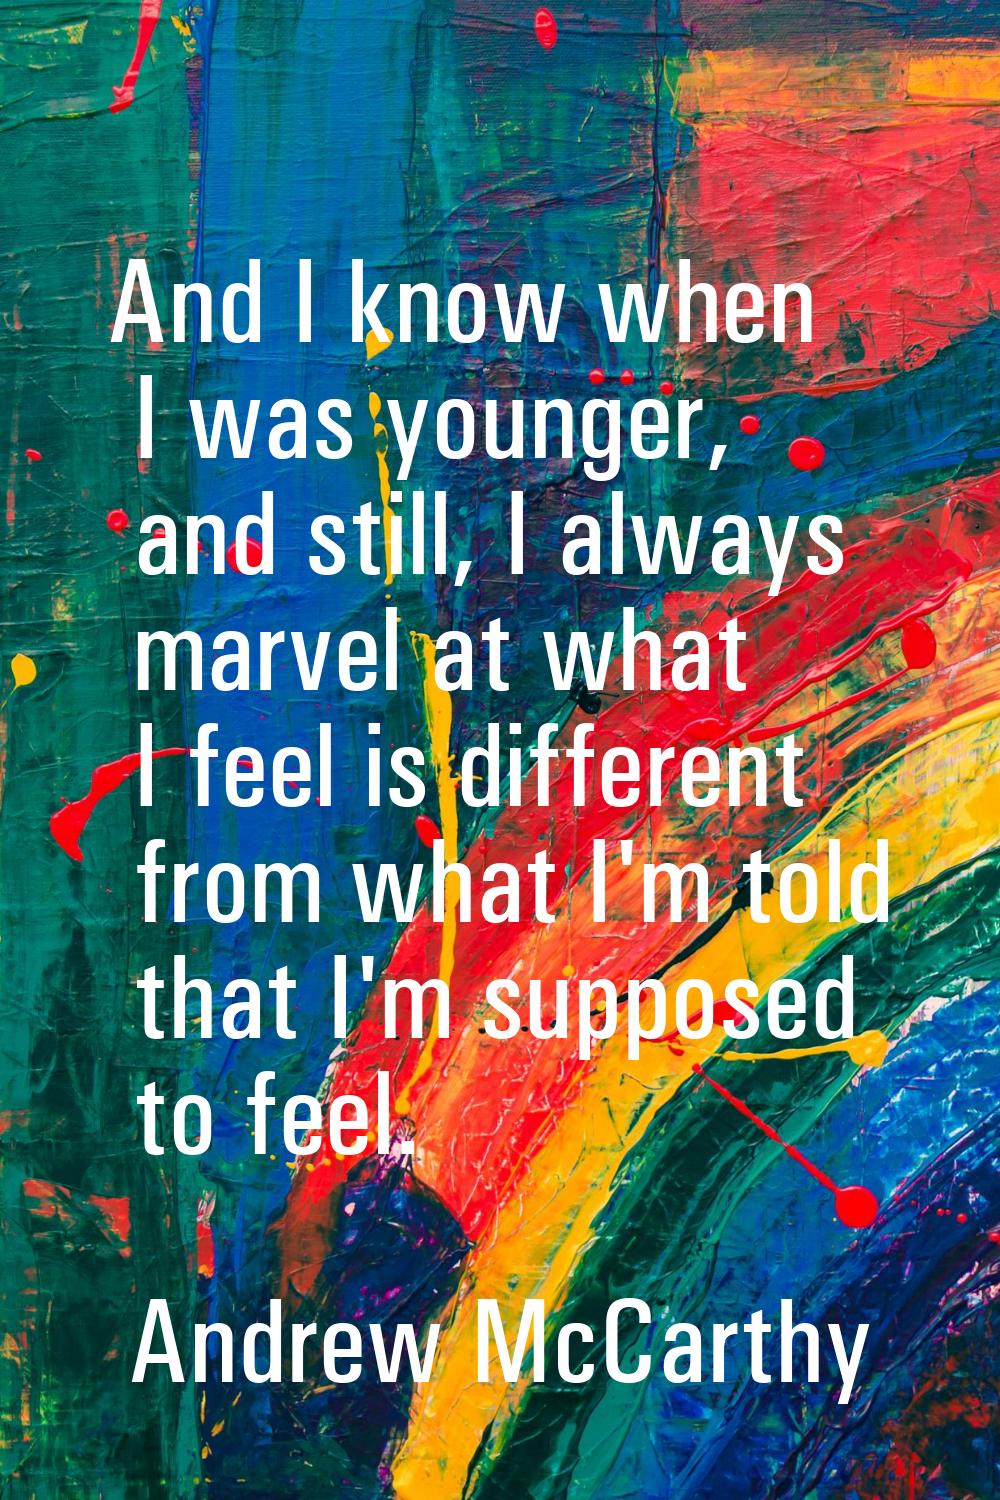 And I know when I was younger, and still, I always marvel at what I feel is different from what I'm